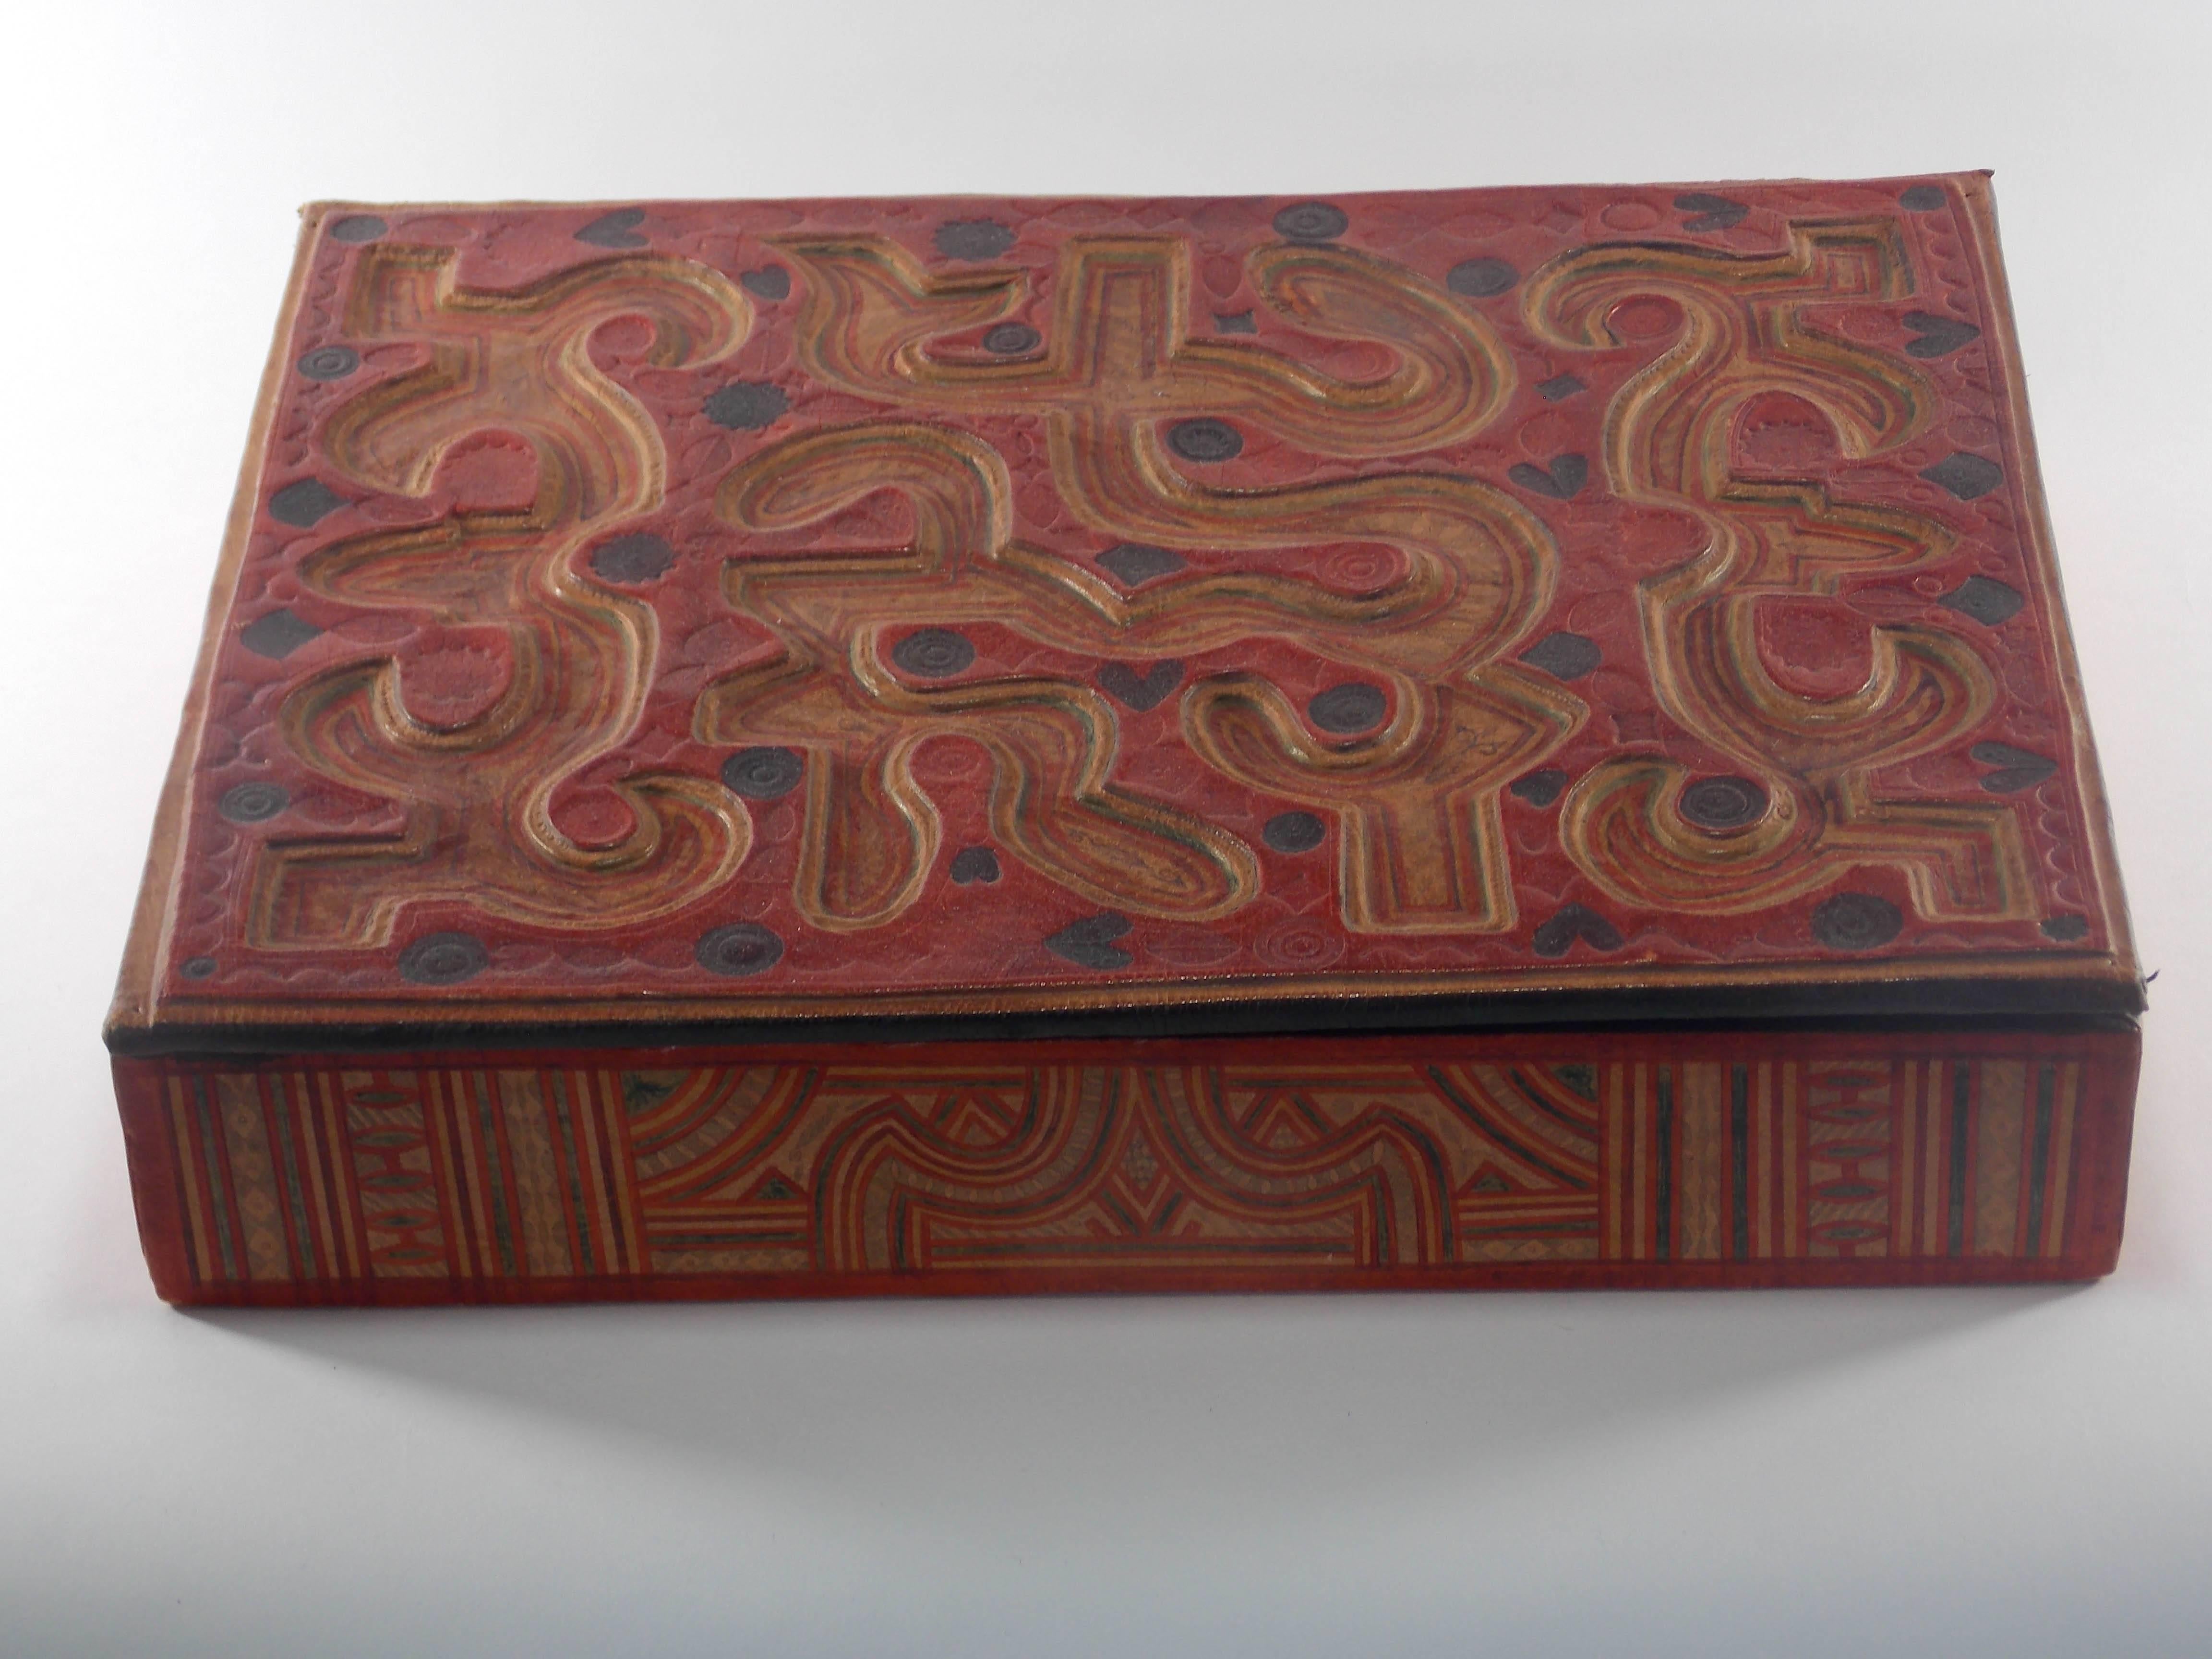 A large-scale box, exhibiting great color and pattern.
Leather and wood.